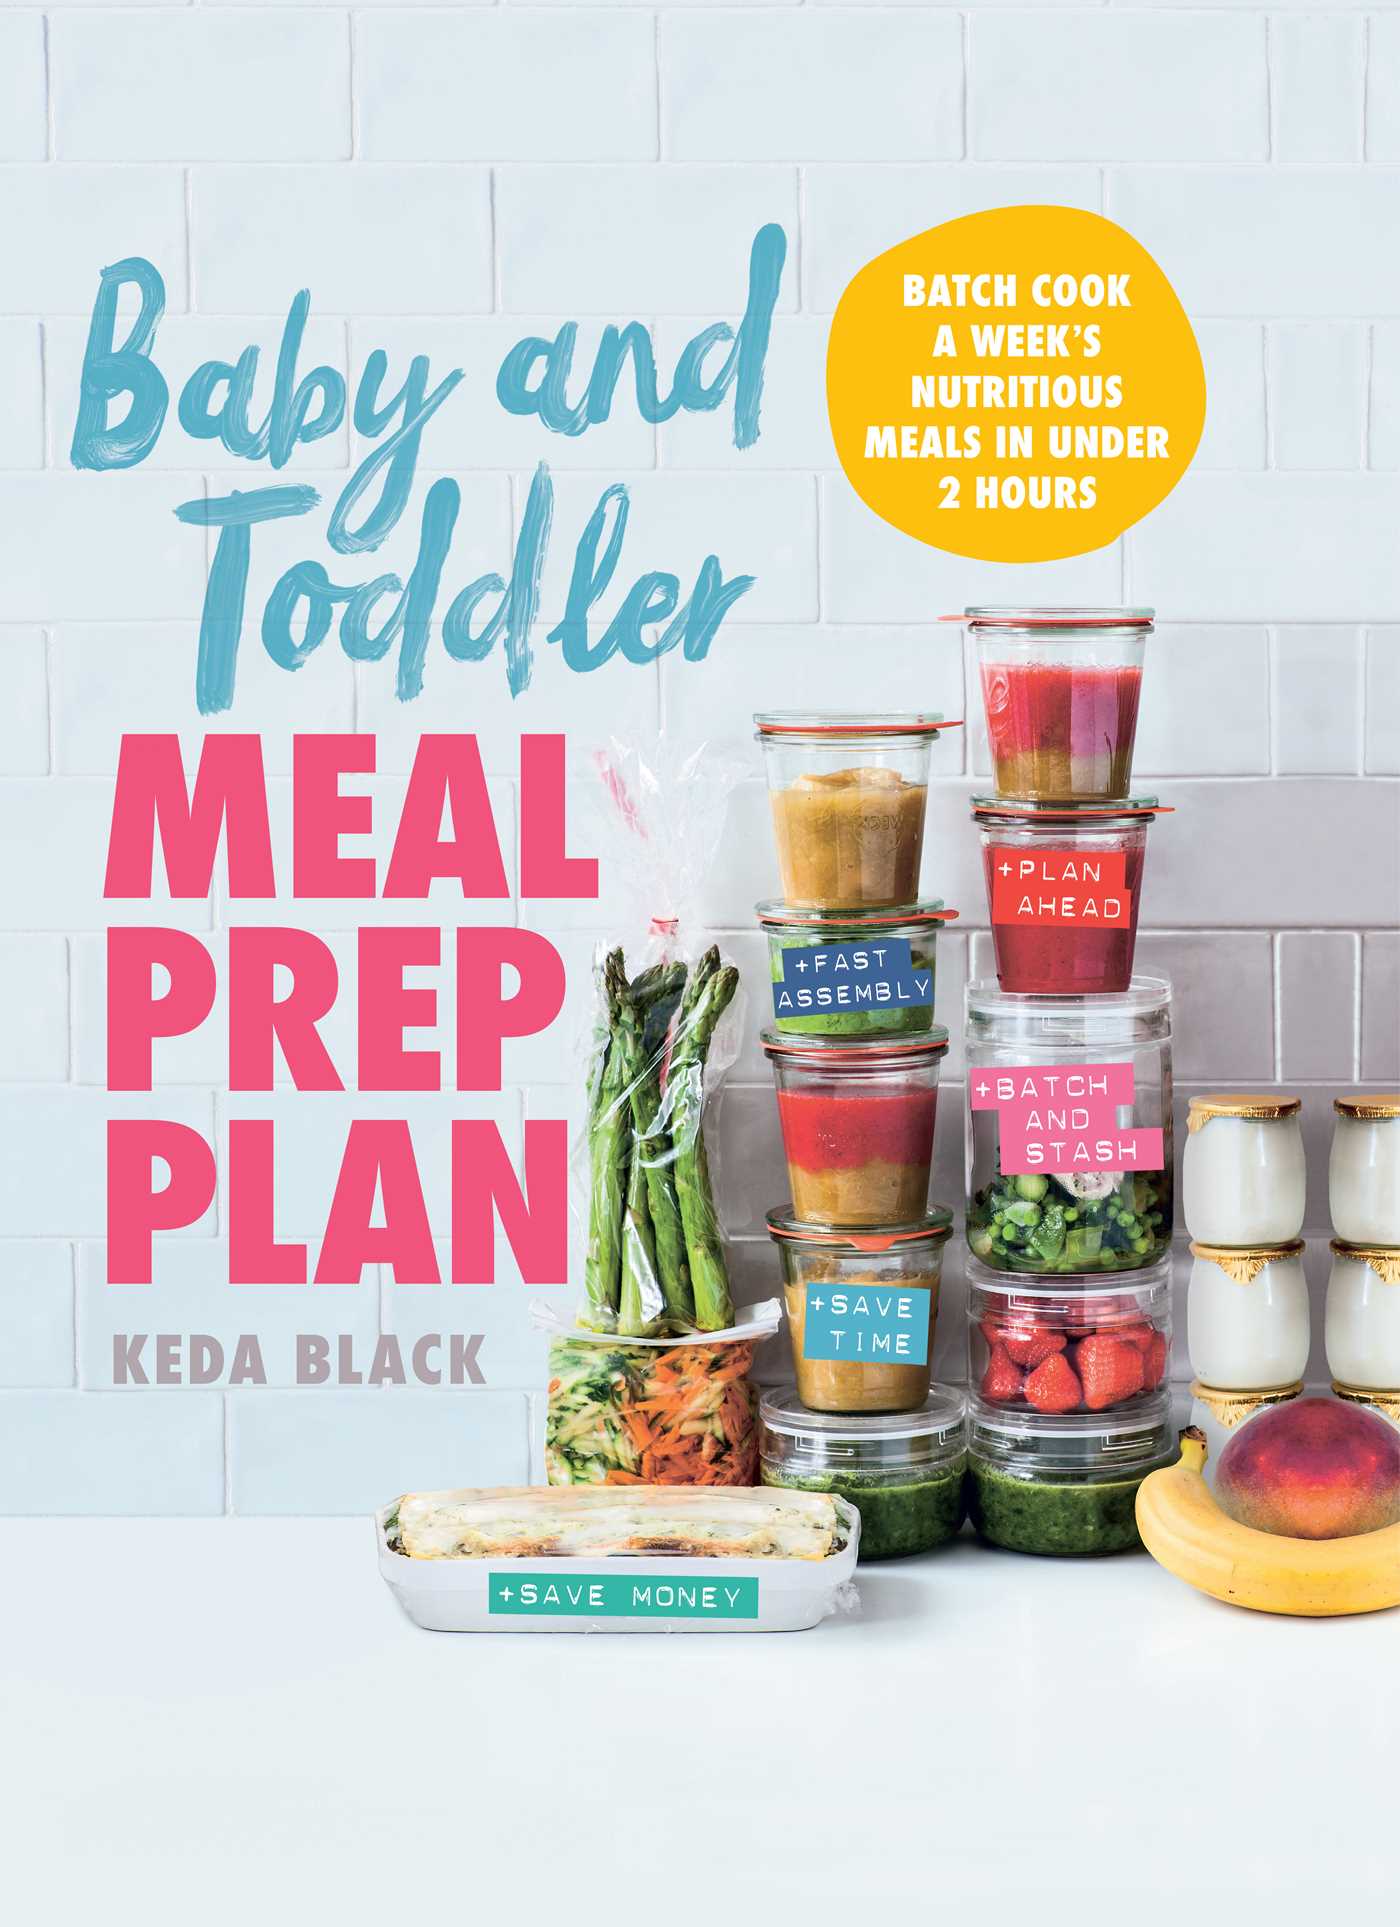 Baby and Toddler Meal Prep Plan : Batch Cook a Week's Nutritious Meals in Under 2 Hours | Black, Keda